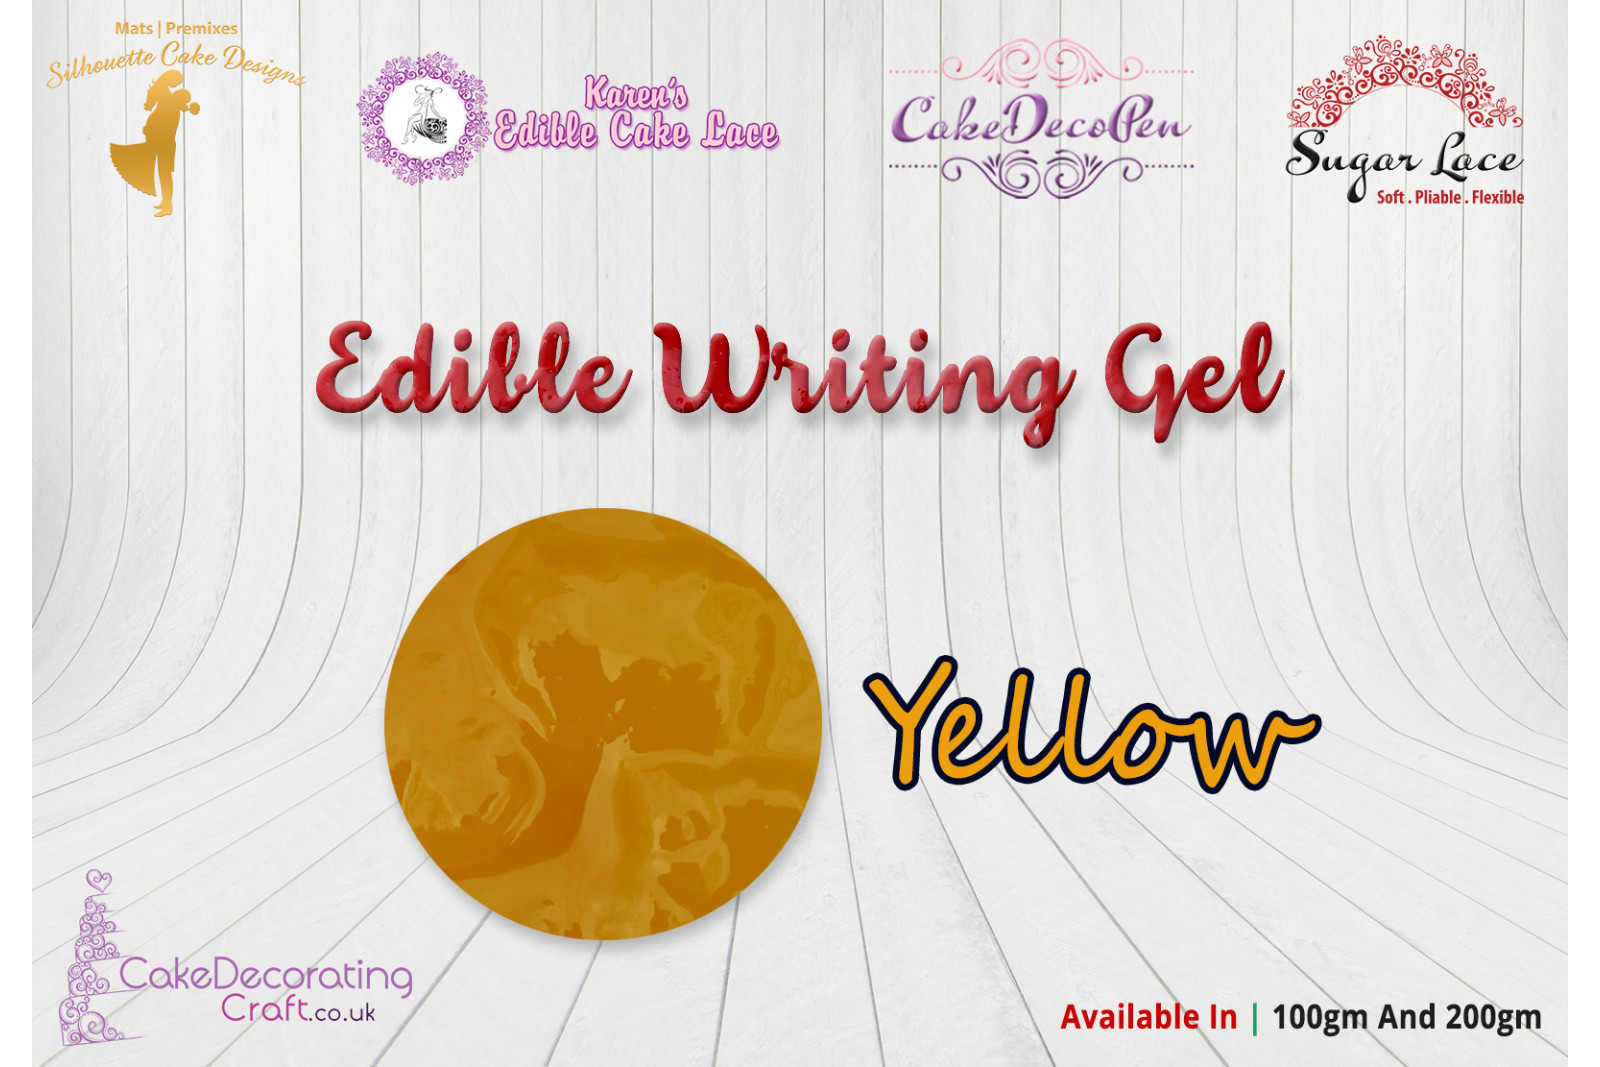 Cake Decorating Craft | Piping And Writing Gel | Yellow With Gold Sparkle